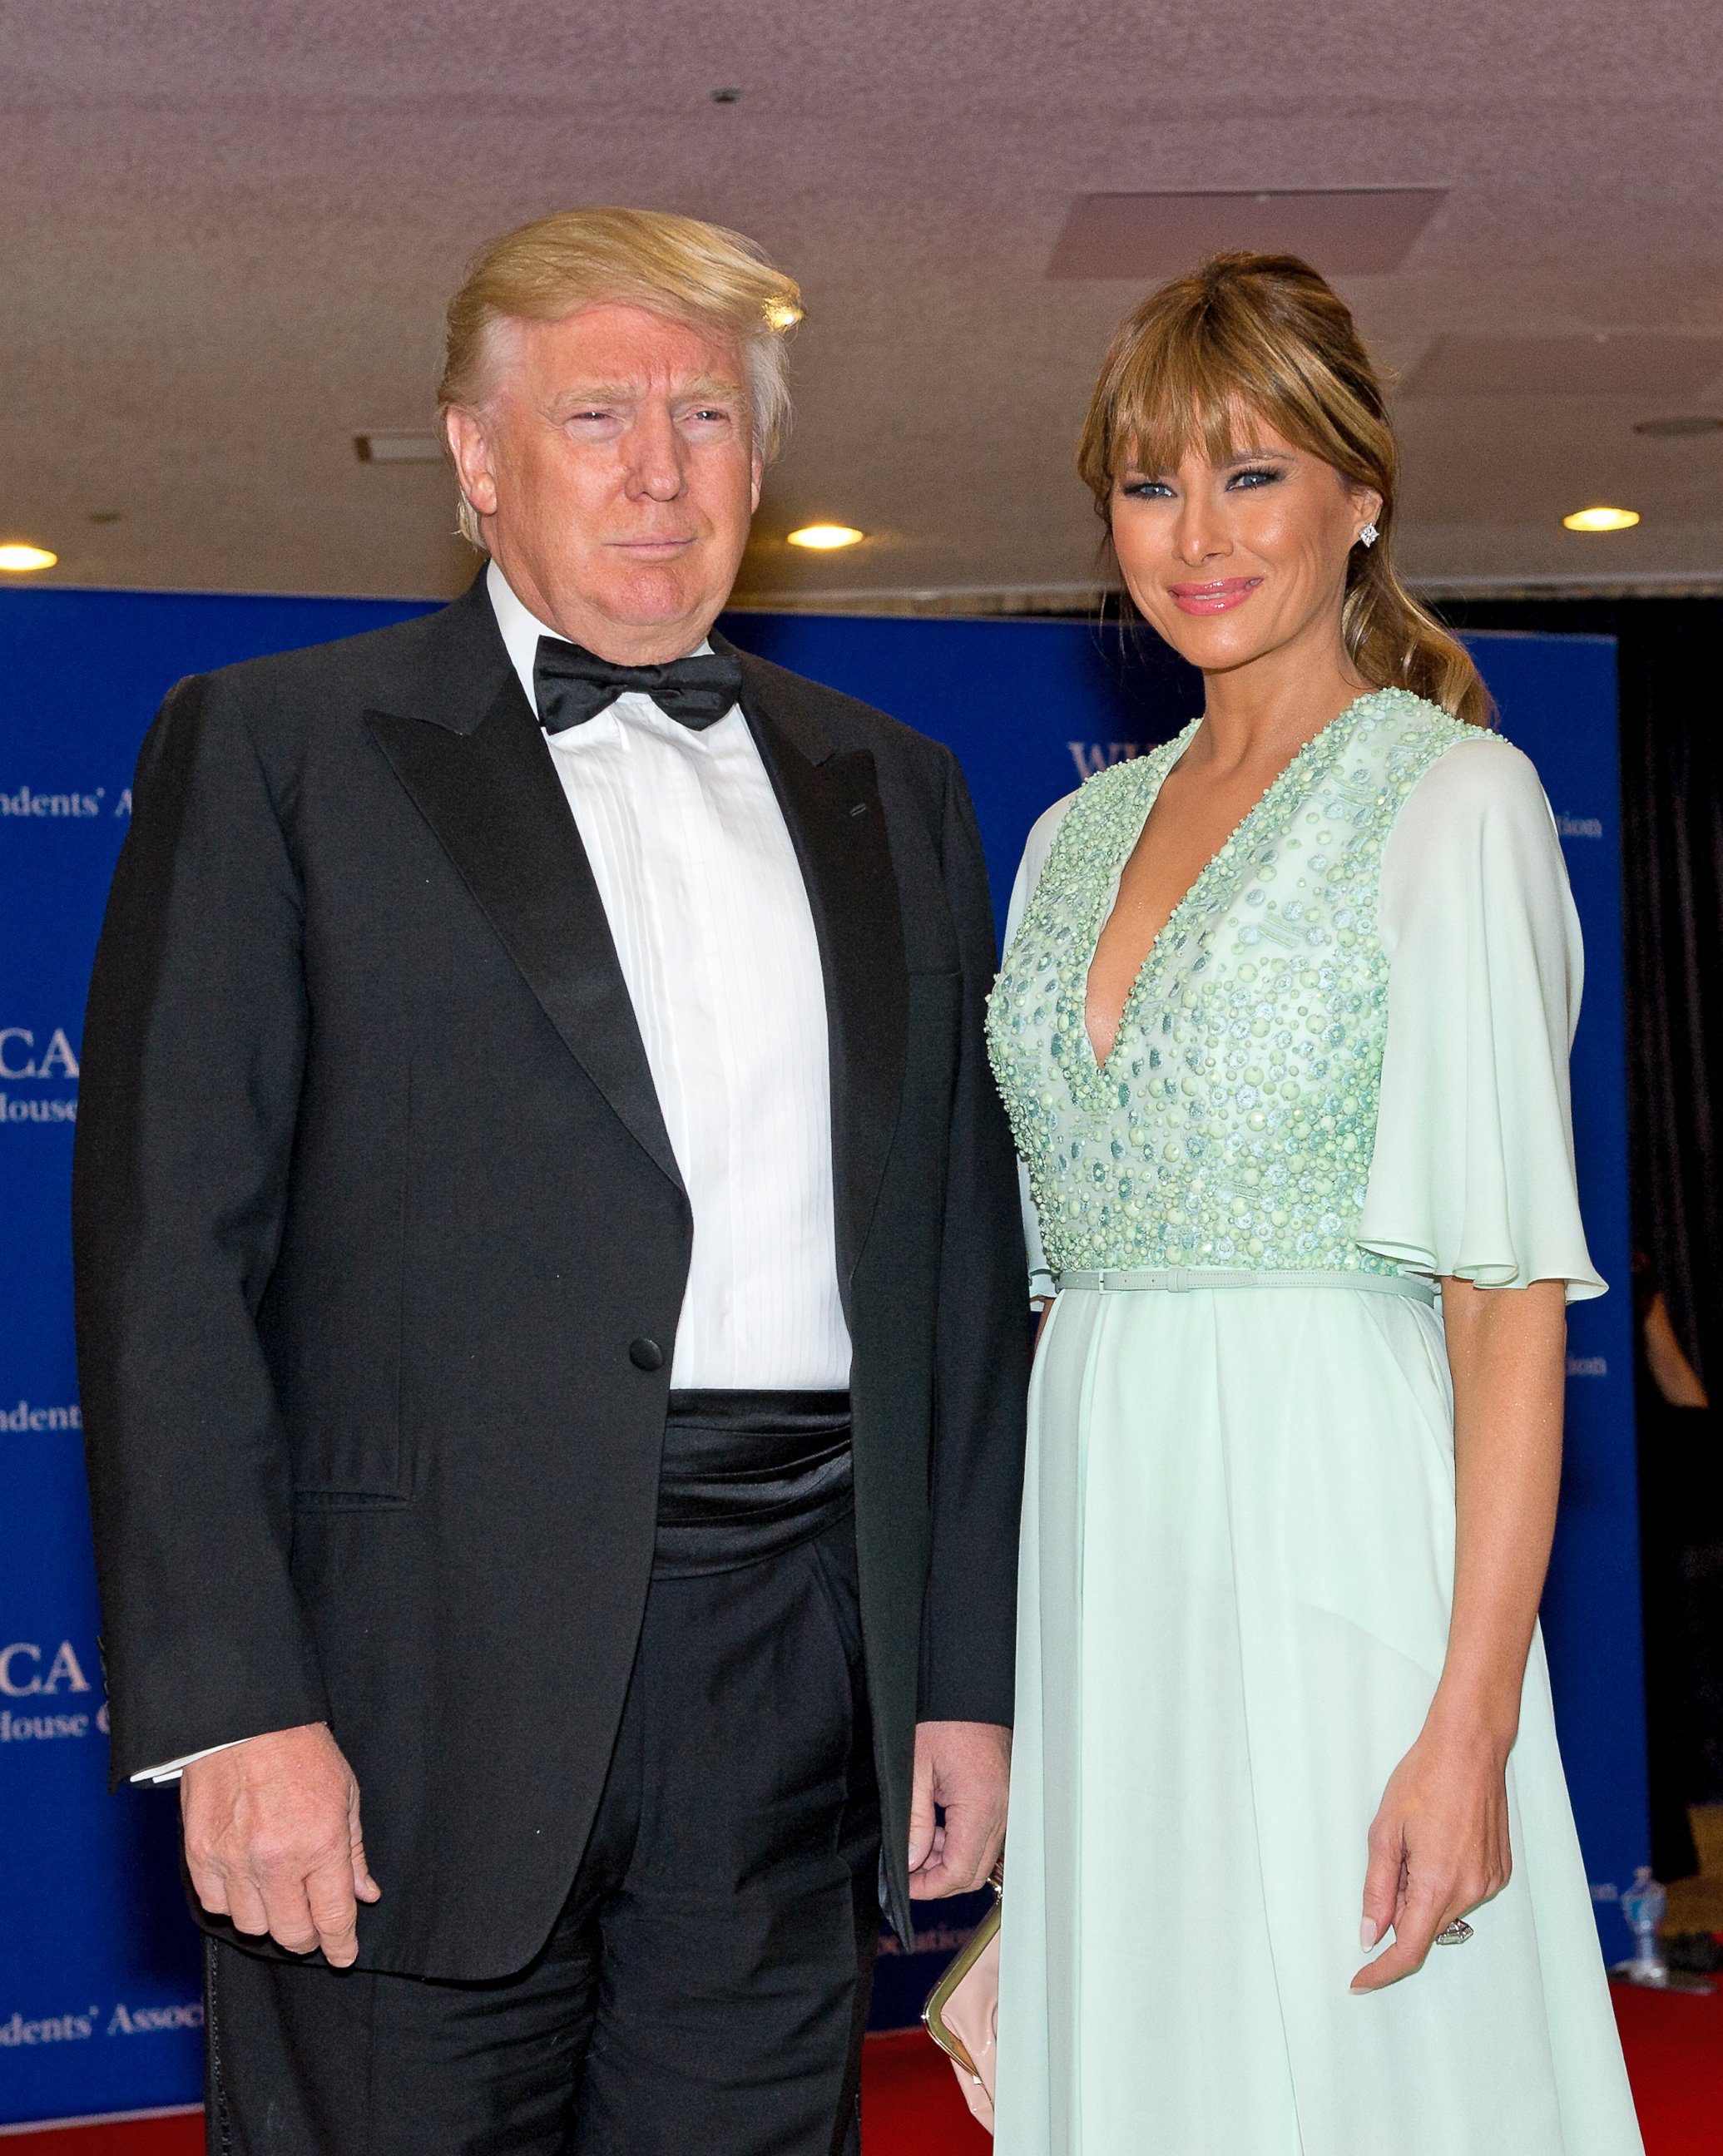 PHOTO: Donald and Melania Trump arrive for the 2015 White House Correspondents Association Annual Dinner at the Washington Hilton Hotel on April 25, 2015. 